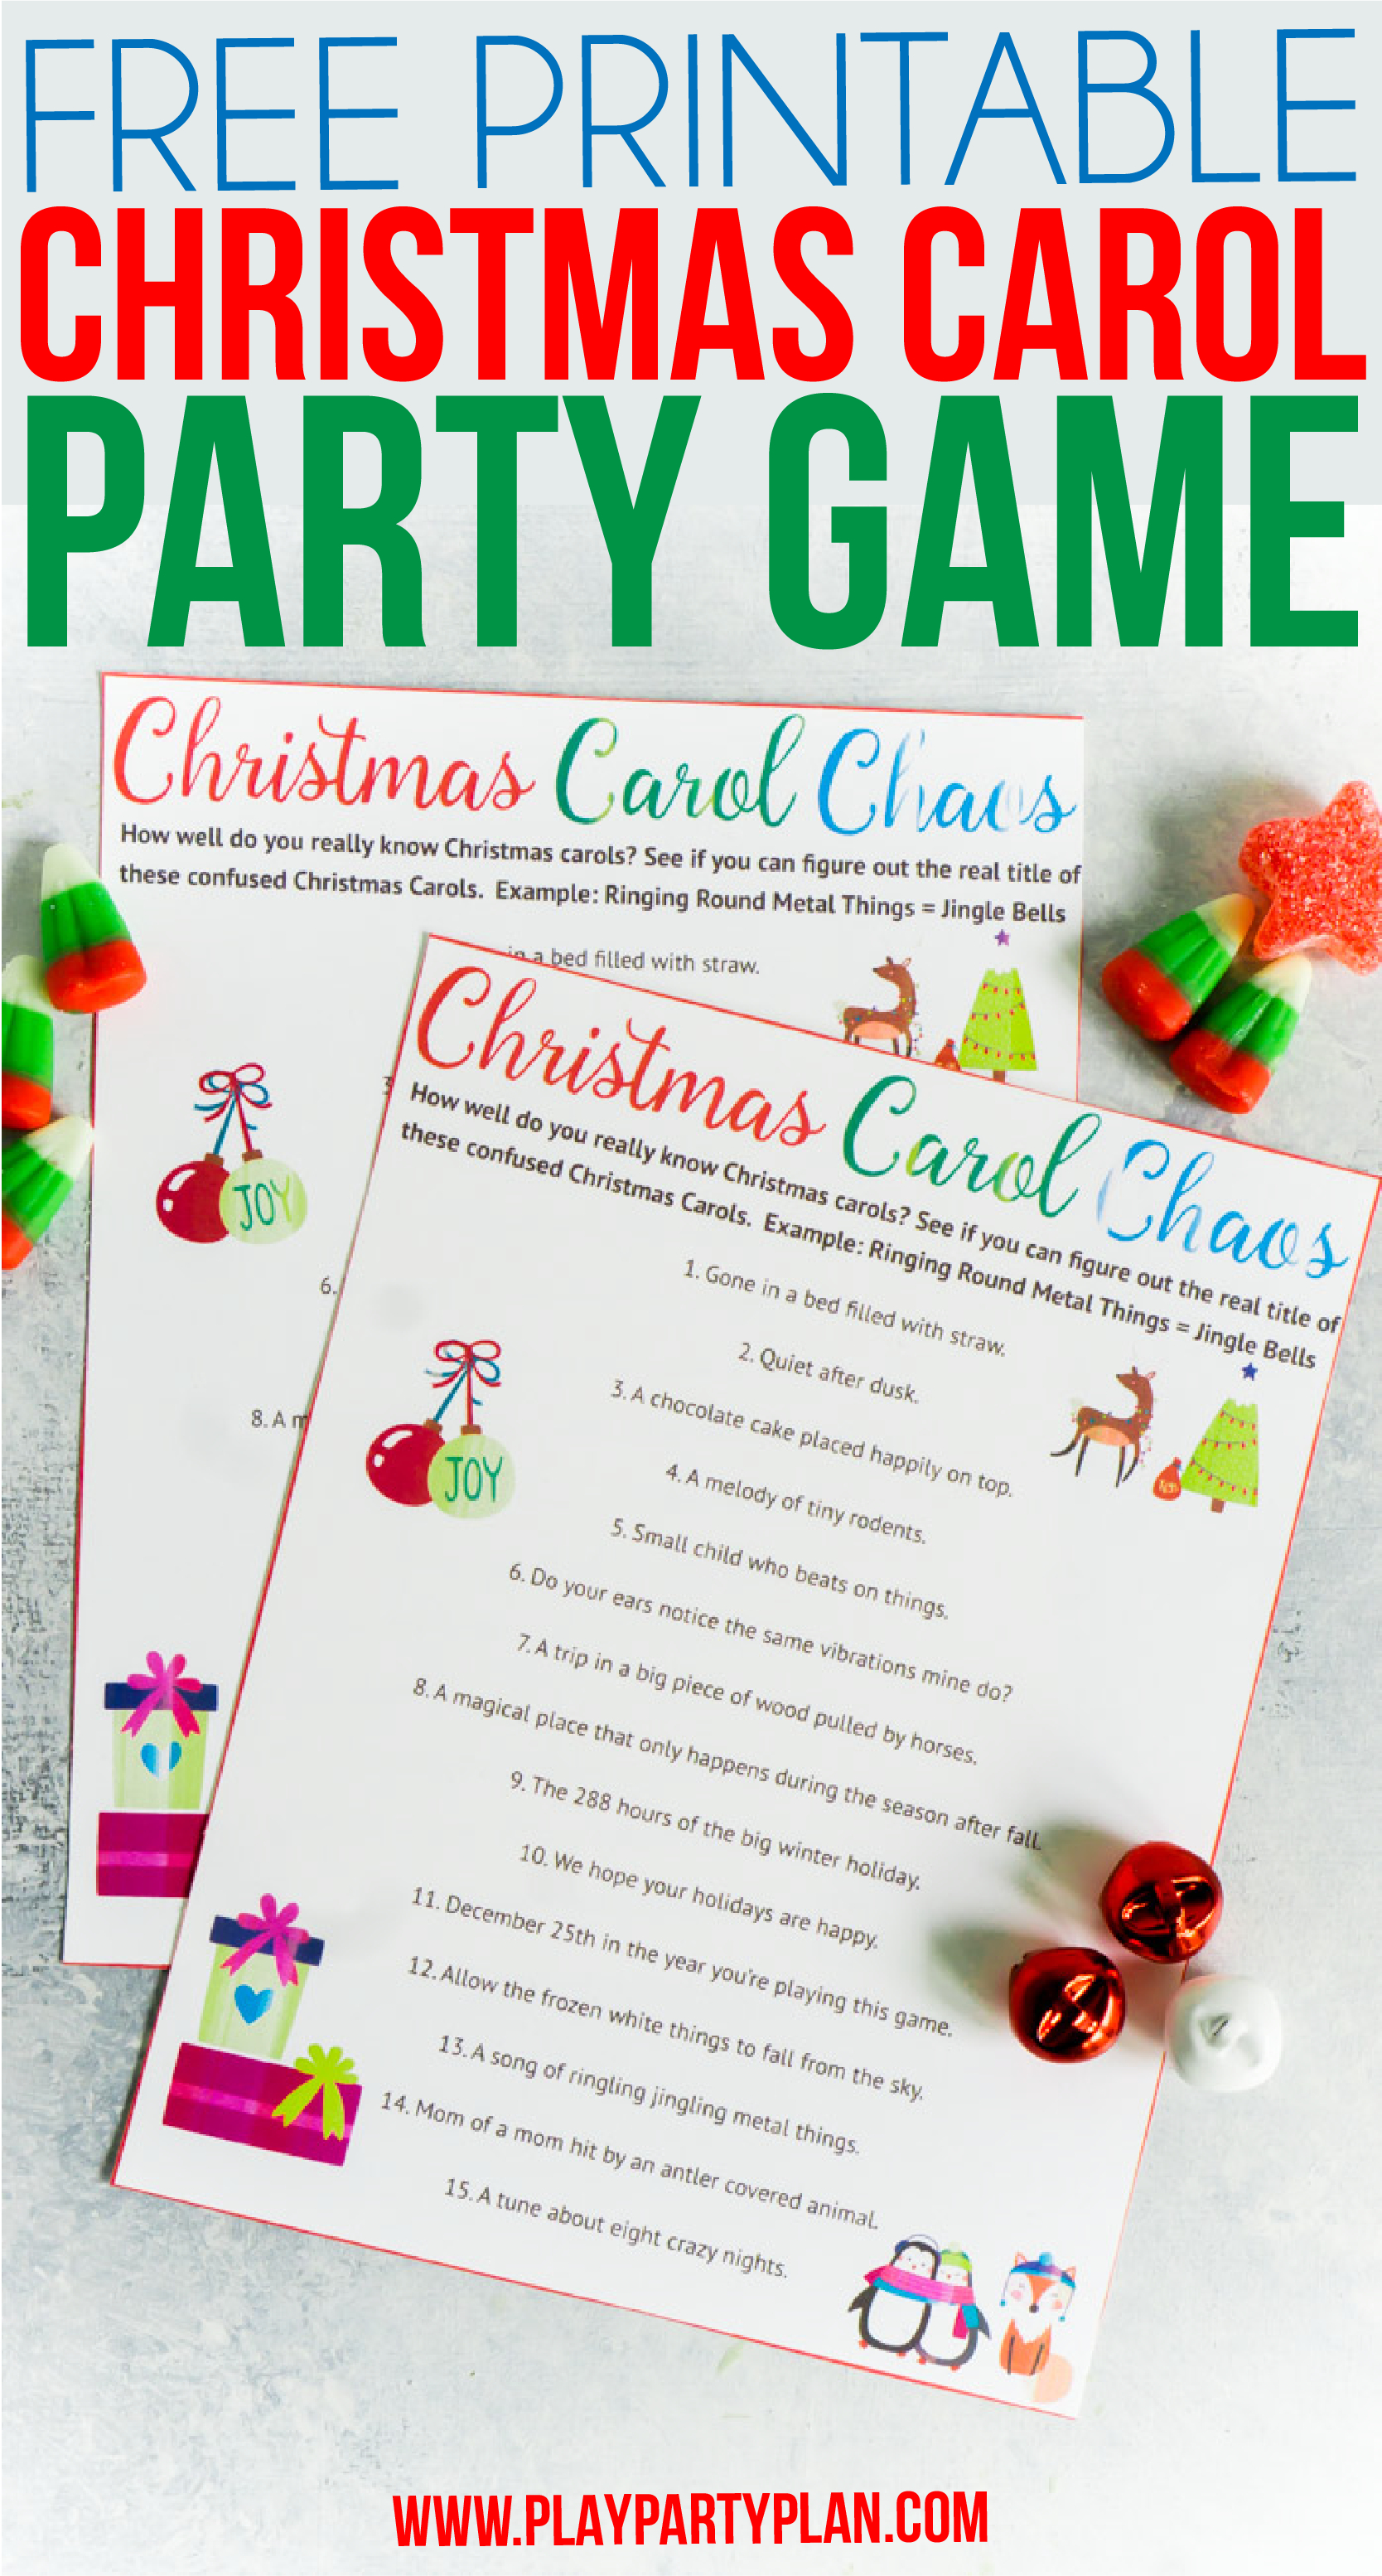 7 Must-Reads Tips For Hosting The Best Christmas Party Ever - Free Printable Christmas Song Picture Game